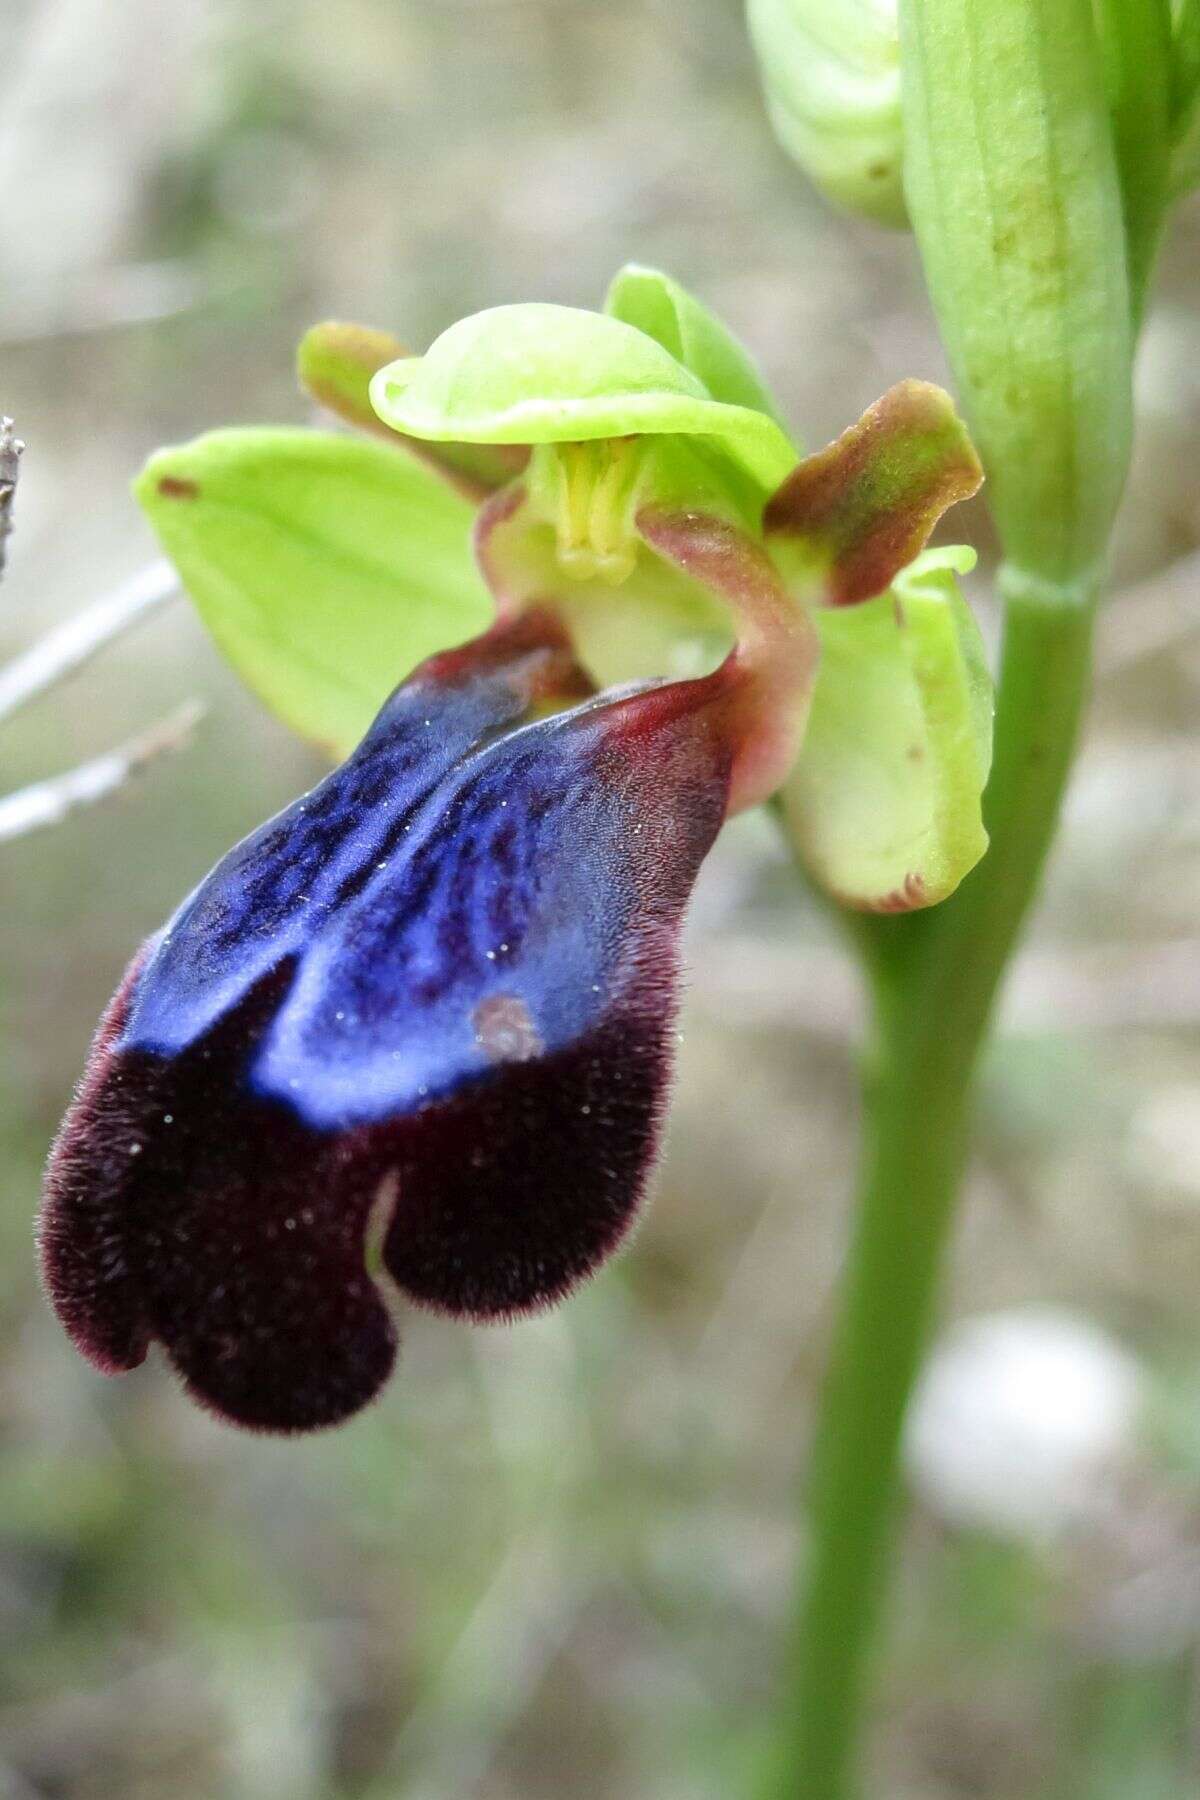 Image of Ophrys fusca subsp. iricolor (Desf.) K. Richt.